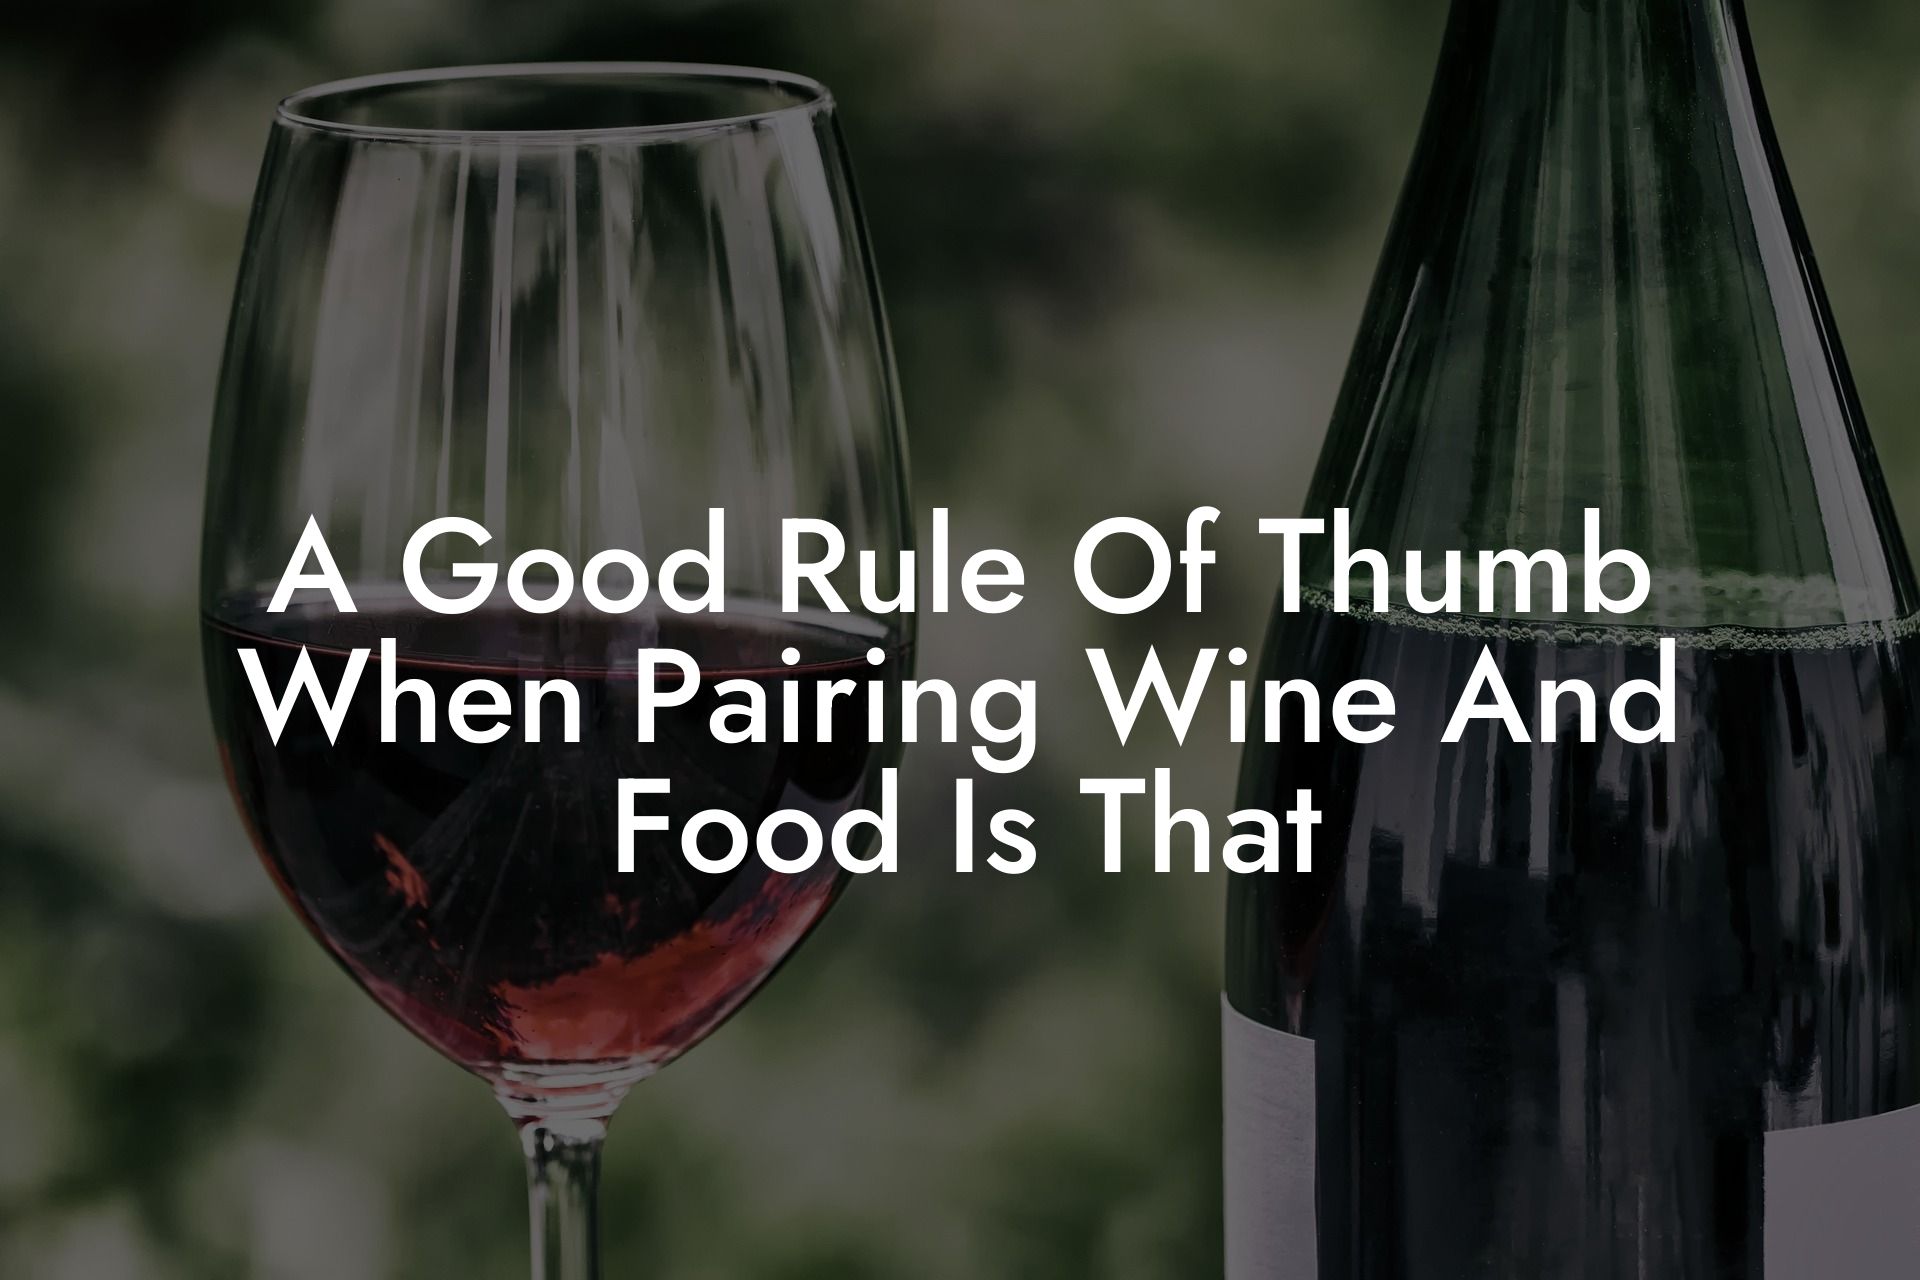 A Good Rule Of Thumb When Pairing Wine And Food Is That